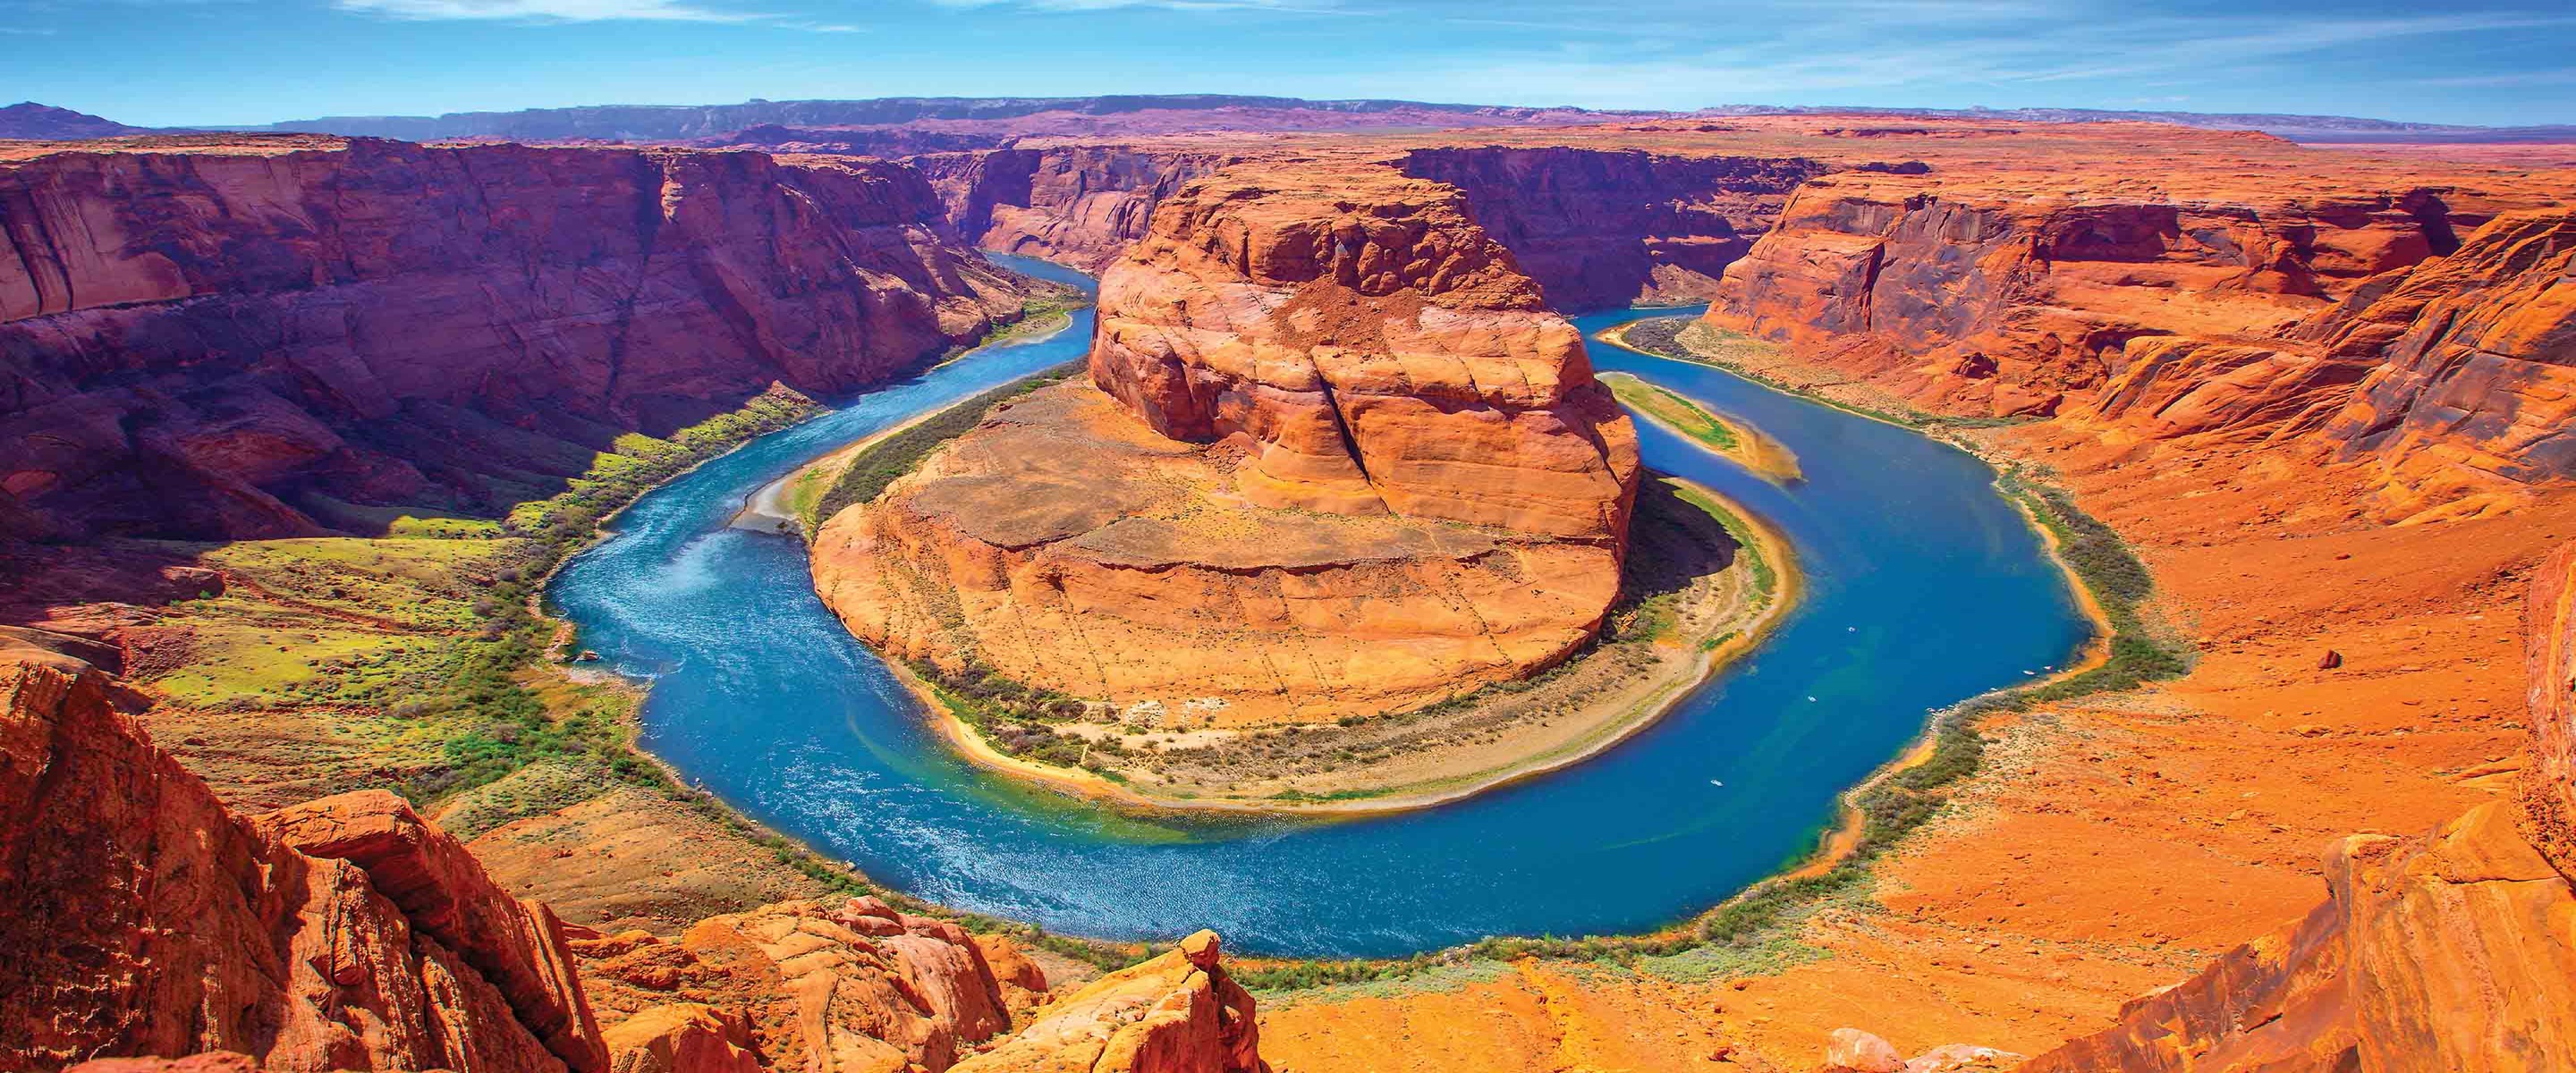 Grand Canyon Tours & Escorted Tours Tauck